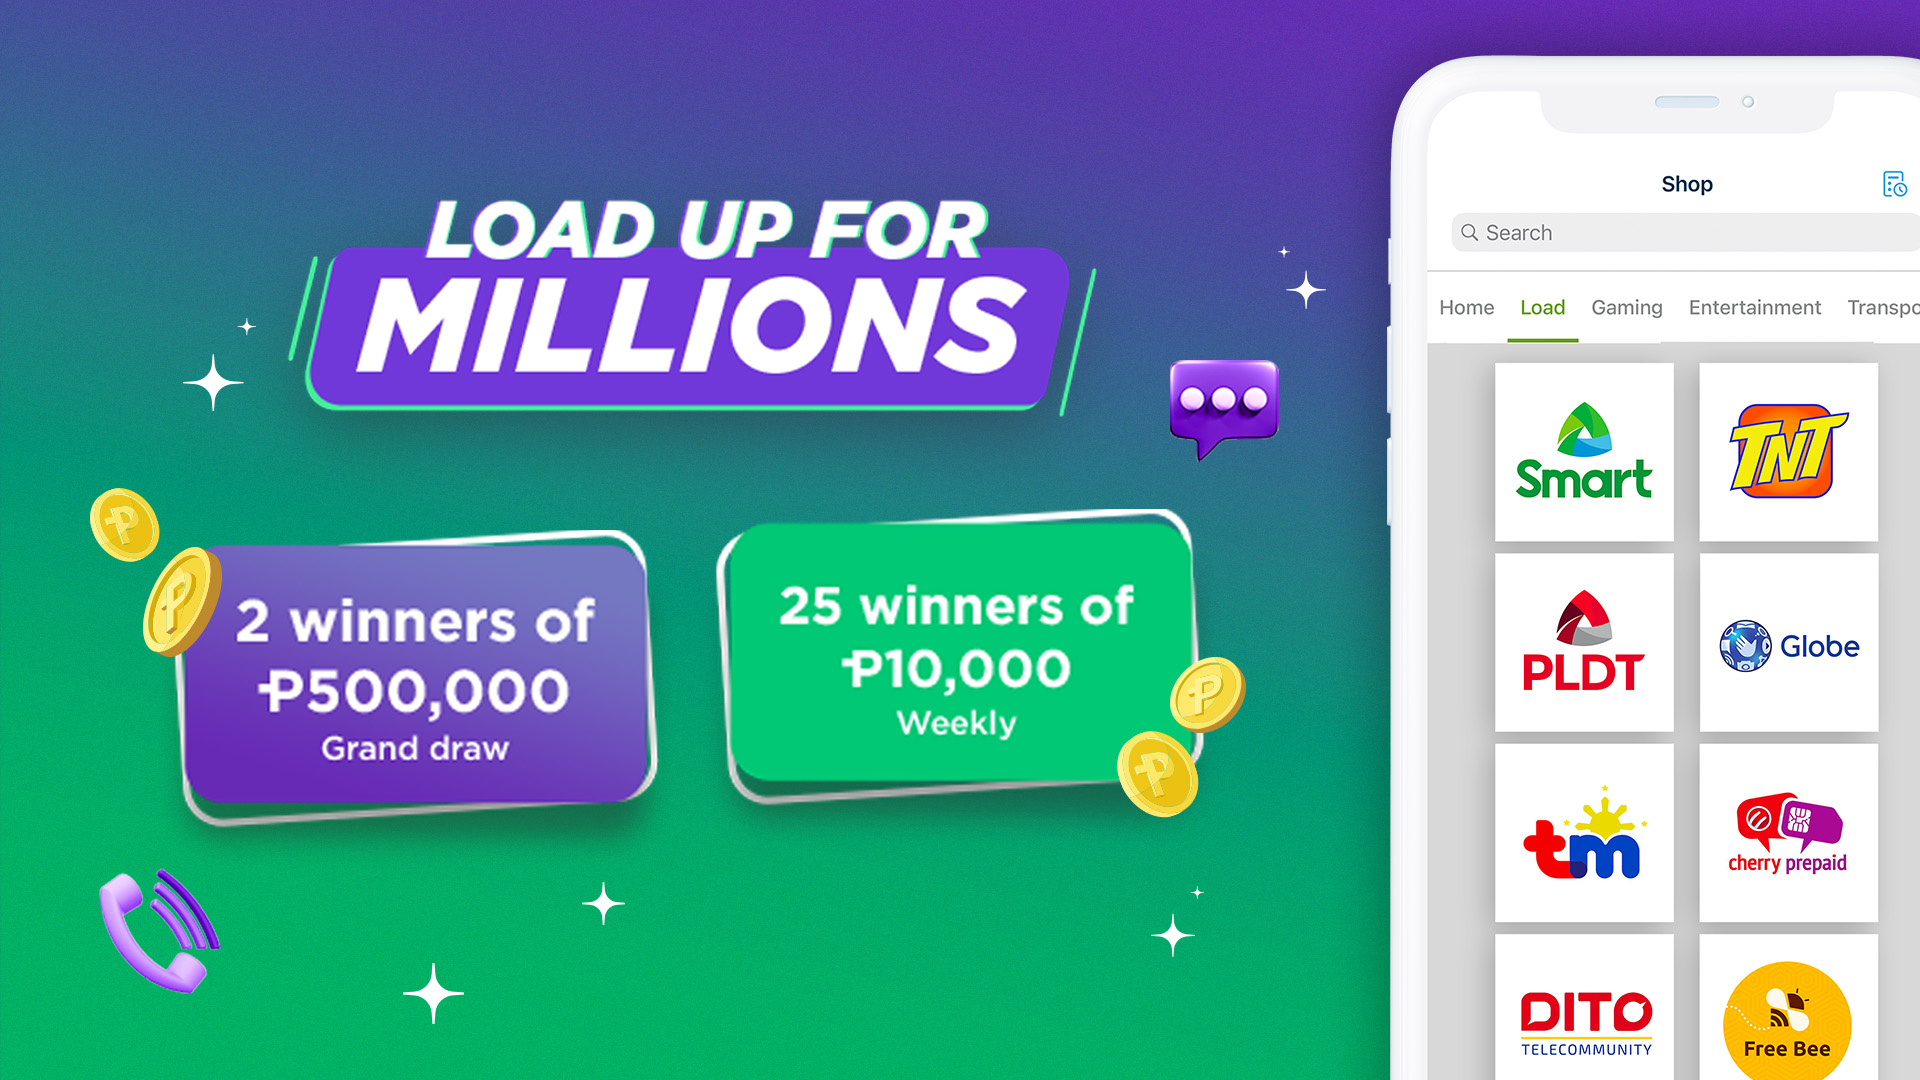 Buy load to win up to 1 MILLION worth of prizes!